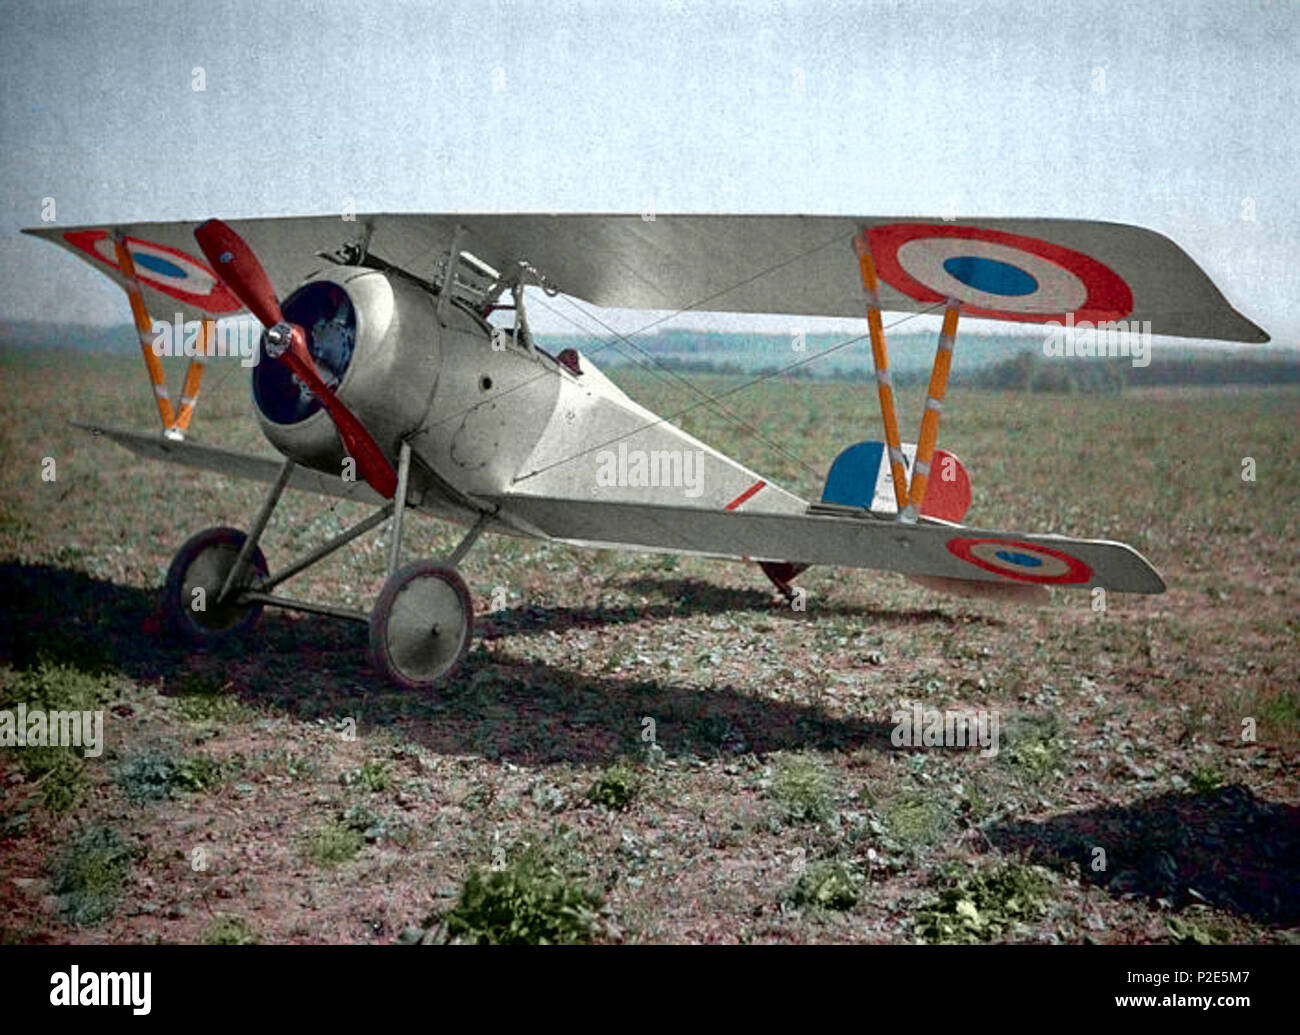 . English: WW1 - Nieuport biplane fighter. (Haut-Rhin, France 1917) by Paul Castelnau This image has been digitally manipulated. 1917. Paul Castelnau  The factual accuracy of this description or the file name is disputed. Reason: Attributed to Fernand Cuville by Réunion des musées nationaux [1] 37 Nieuport 23 C.1 (colour) Stock Photo